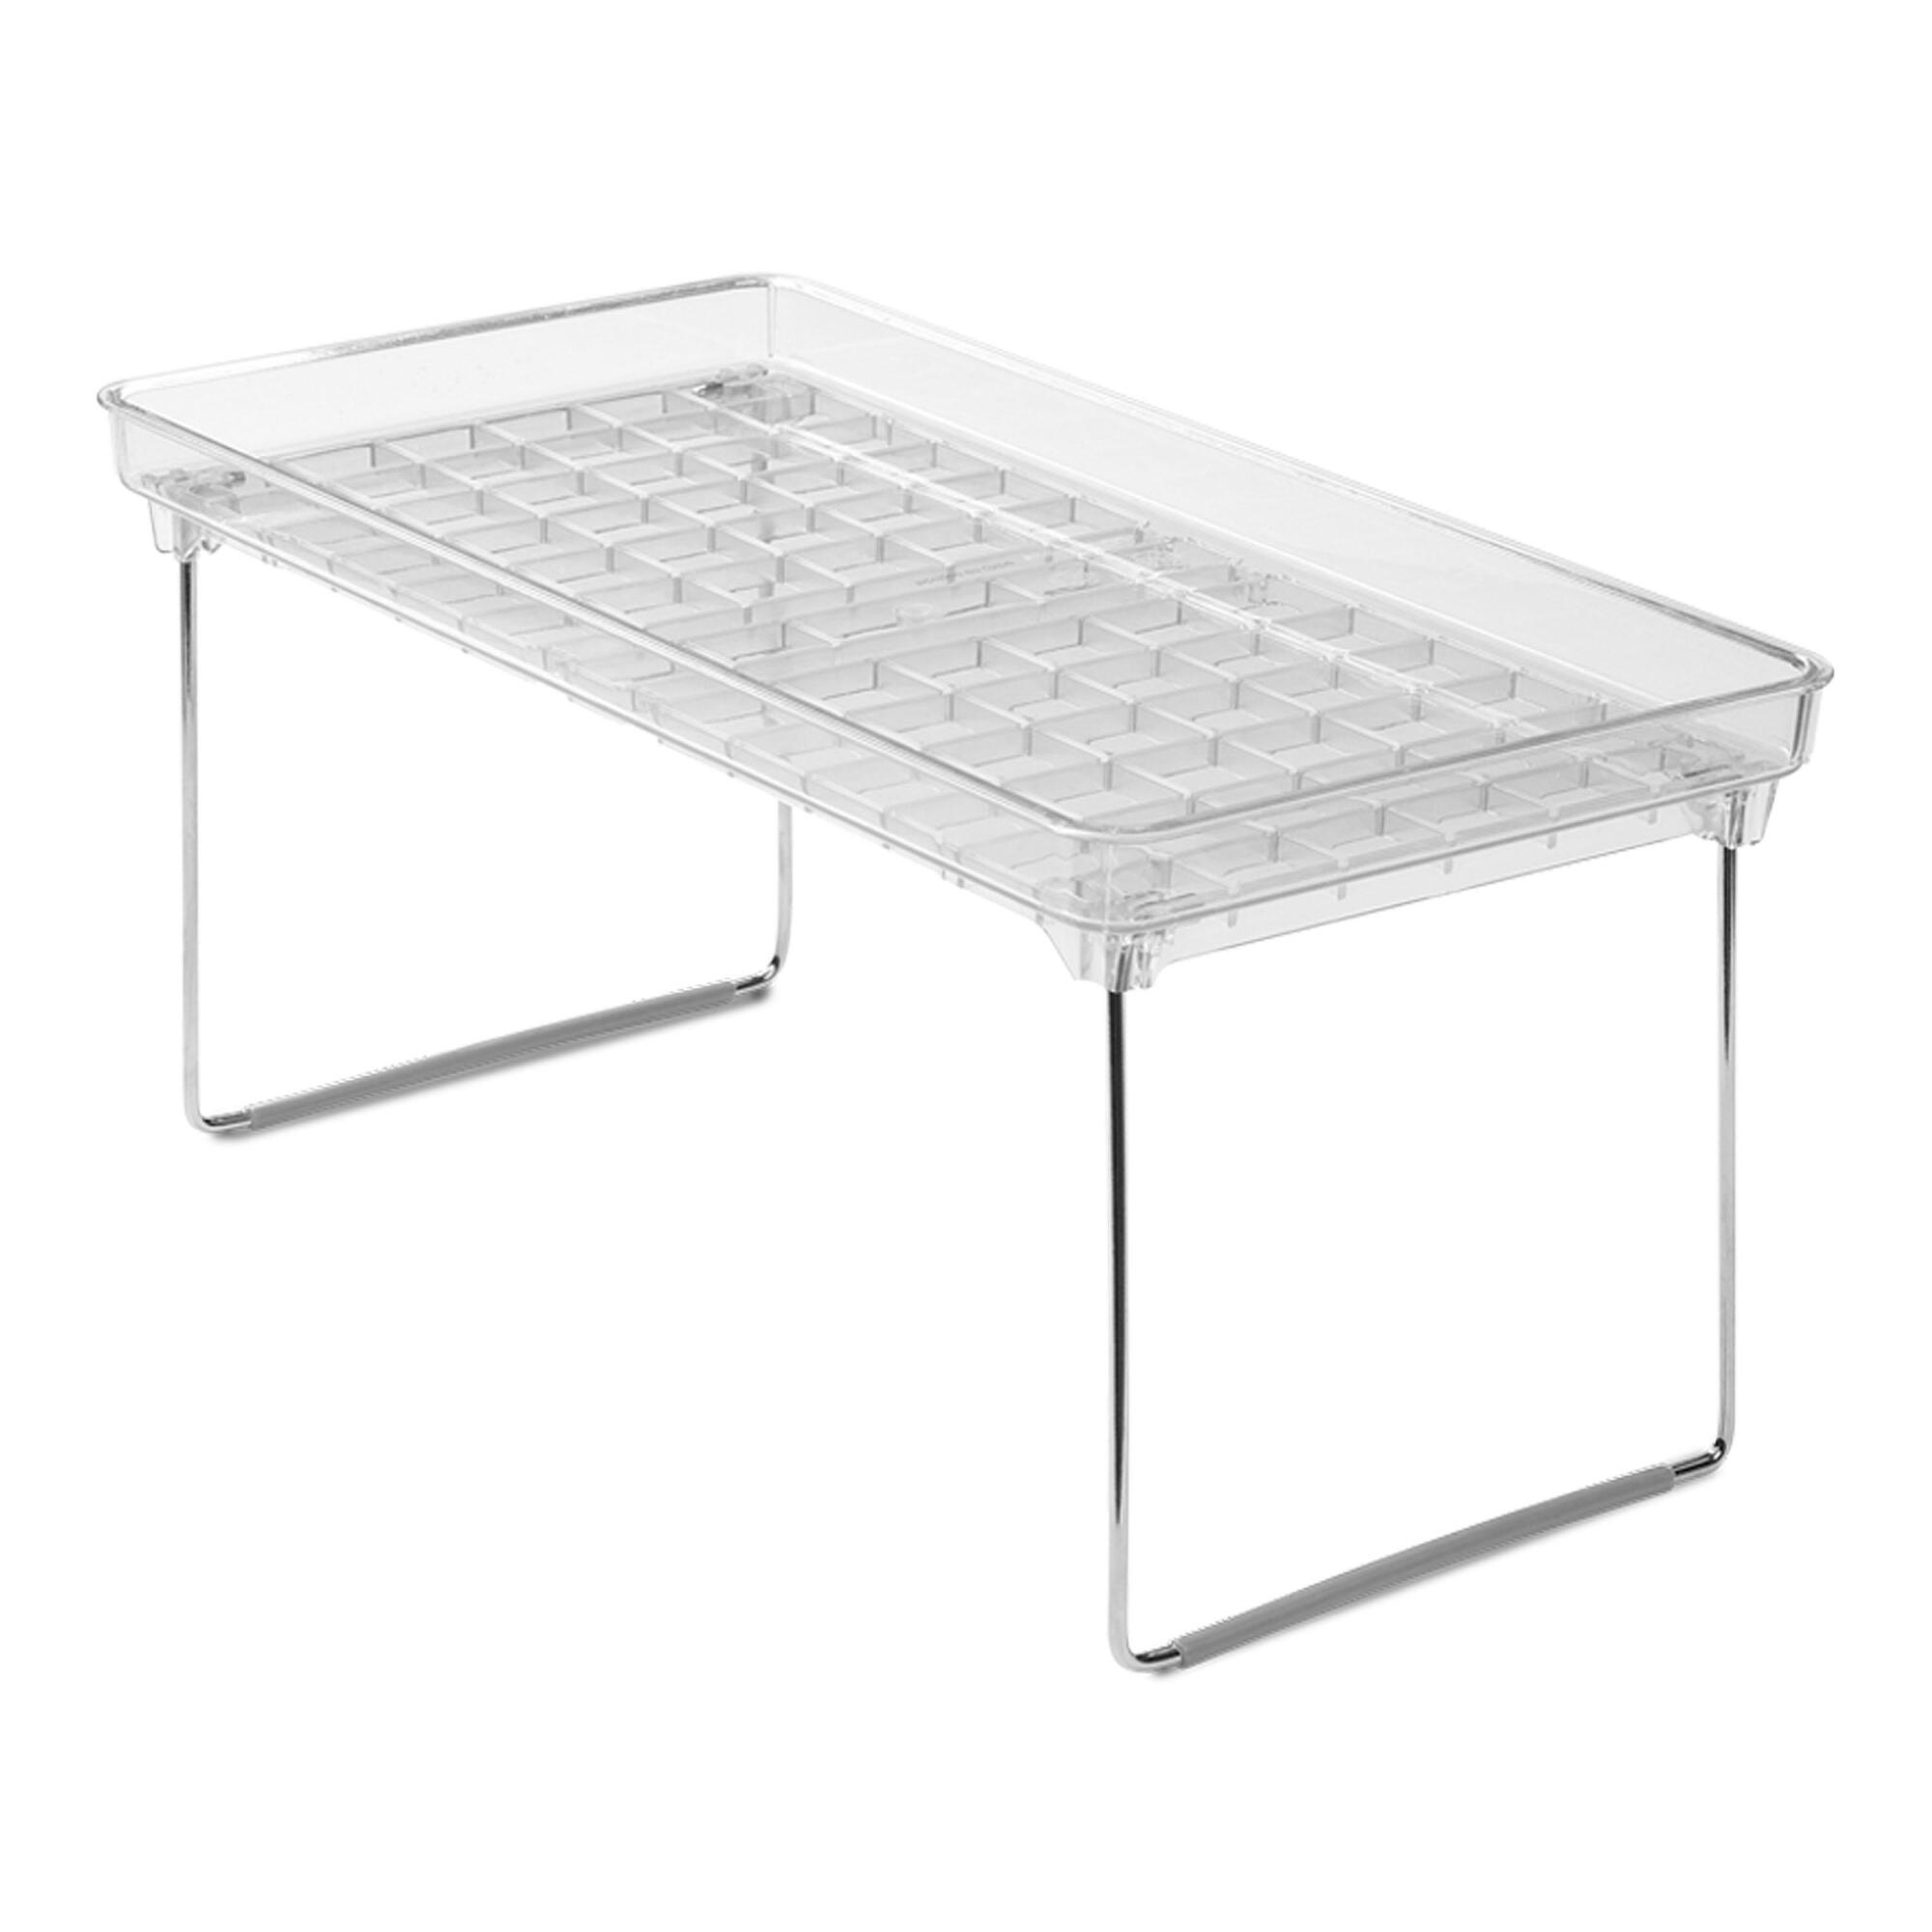 Large Madesmart Clear Stacking Shelf by World Market